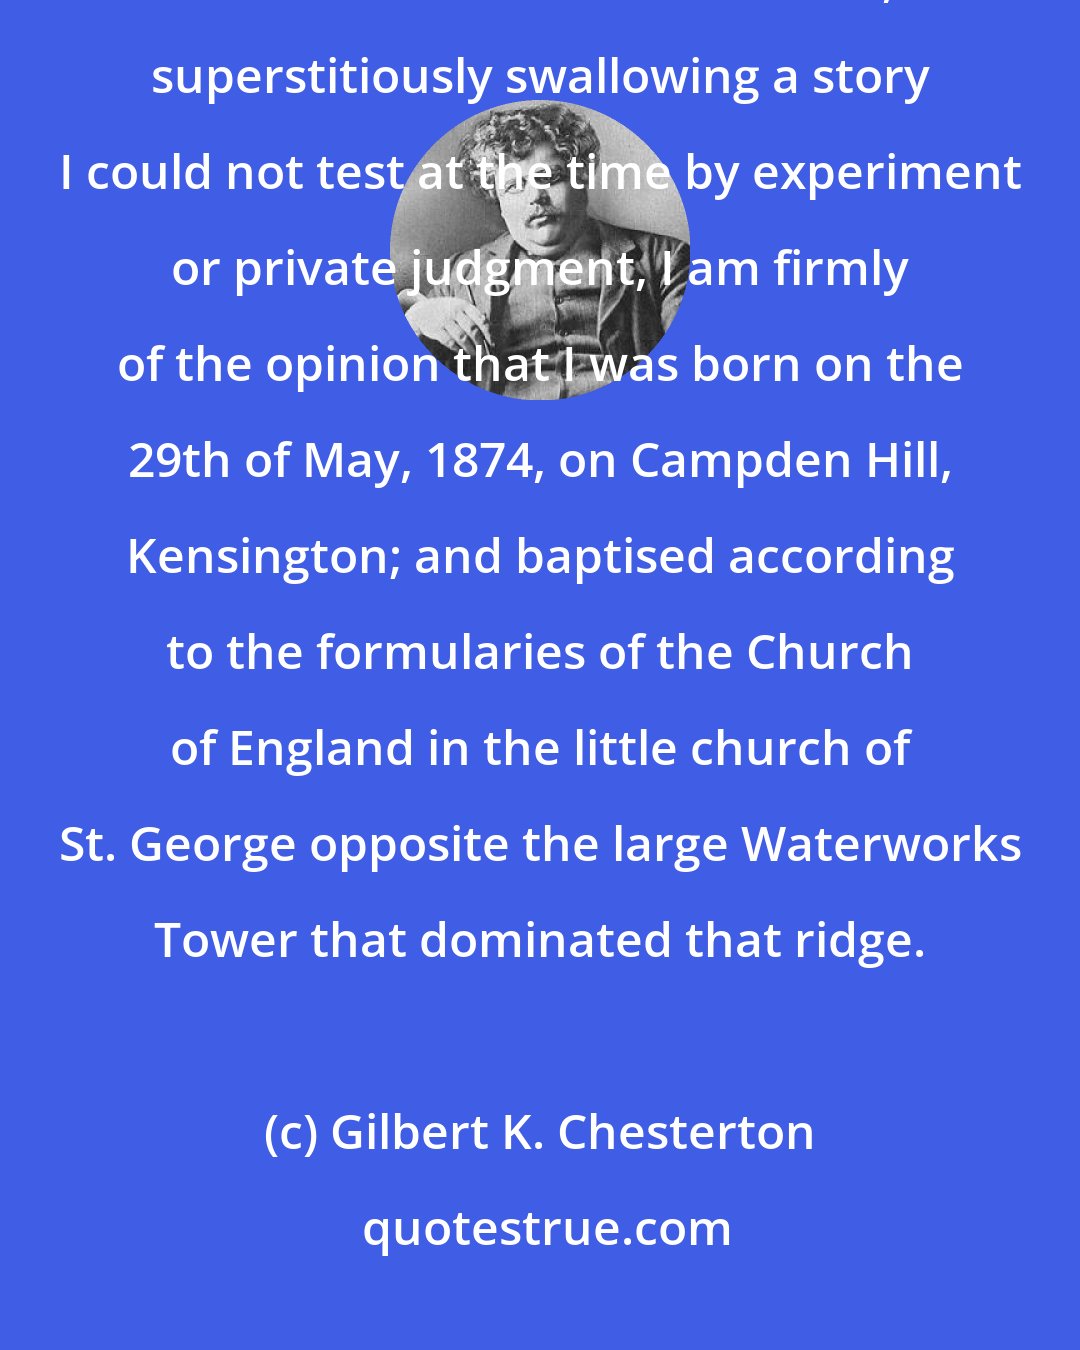 Gilbert K. Chesterton: Bowing down in blind credulity, as is my custom, before mere authority and the tradition of the elders, superstitiously swallowing a story I could not test at the time by experiment or private judgment, I am firmly of the opinion that I was born on the 29th of May, 1874, on Campden Hill, Kensington; and baptised according to the formularies of the Church of England in the little church of St. George opposite the large Waterworks Tower that dominated that ridge.